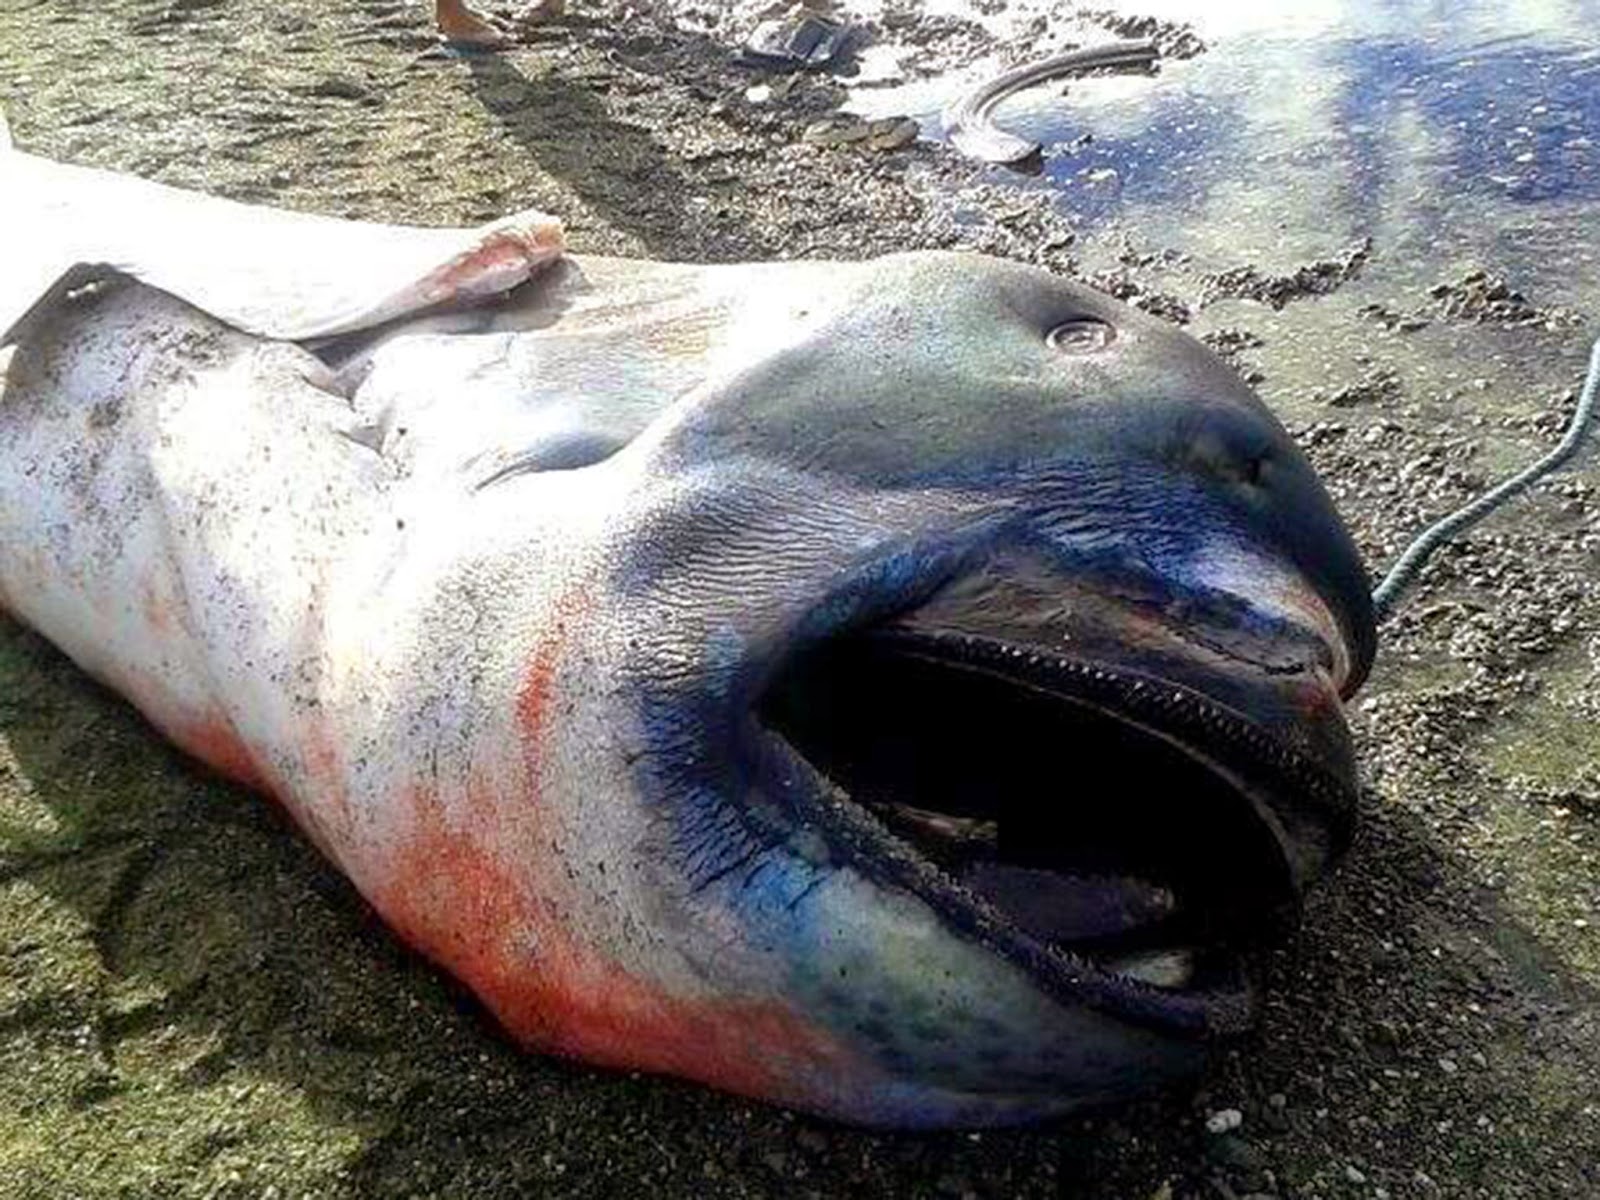 15-foot megamouth shark washed up on a Philippines beach was found dead